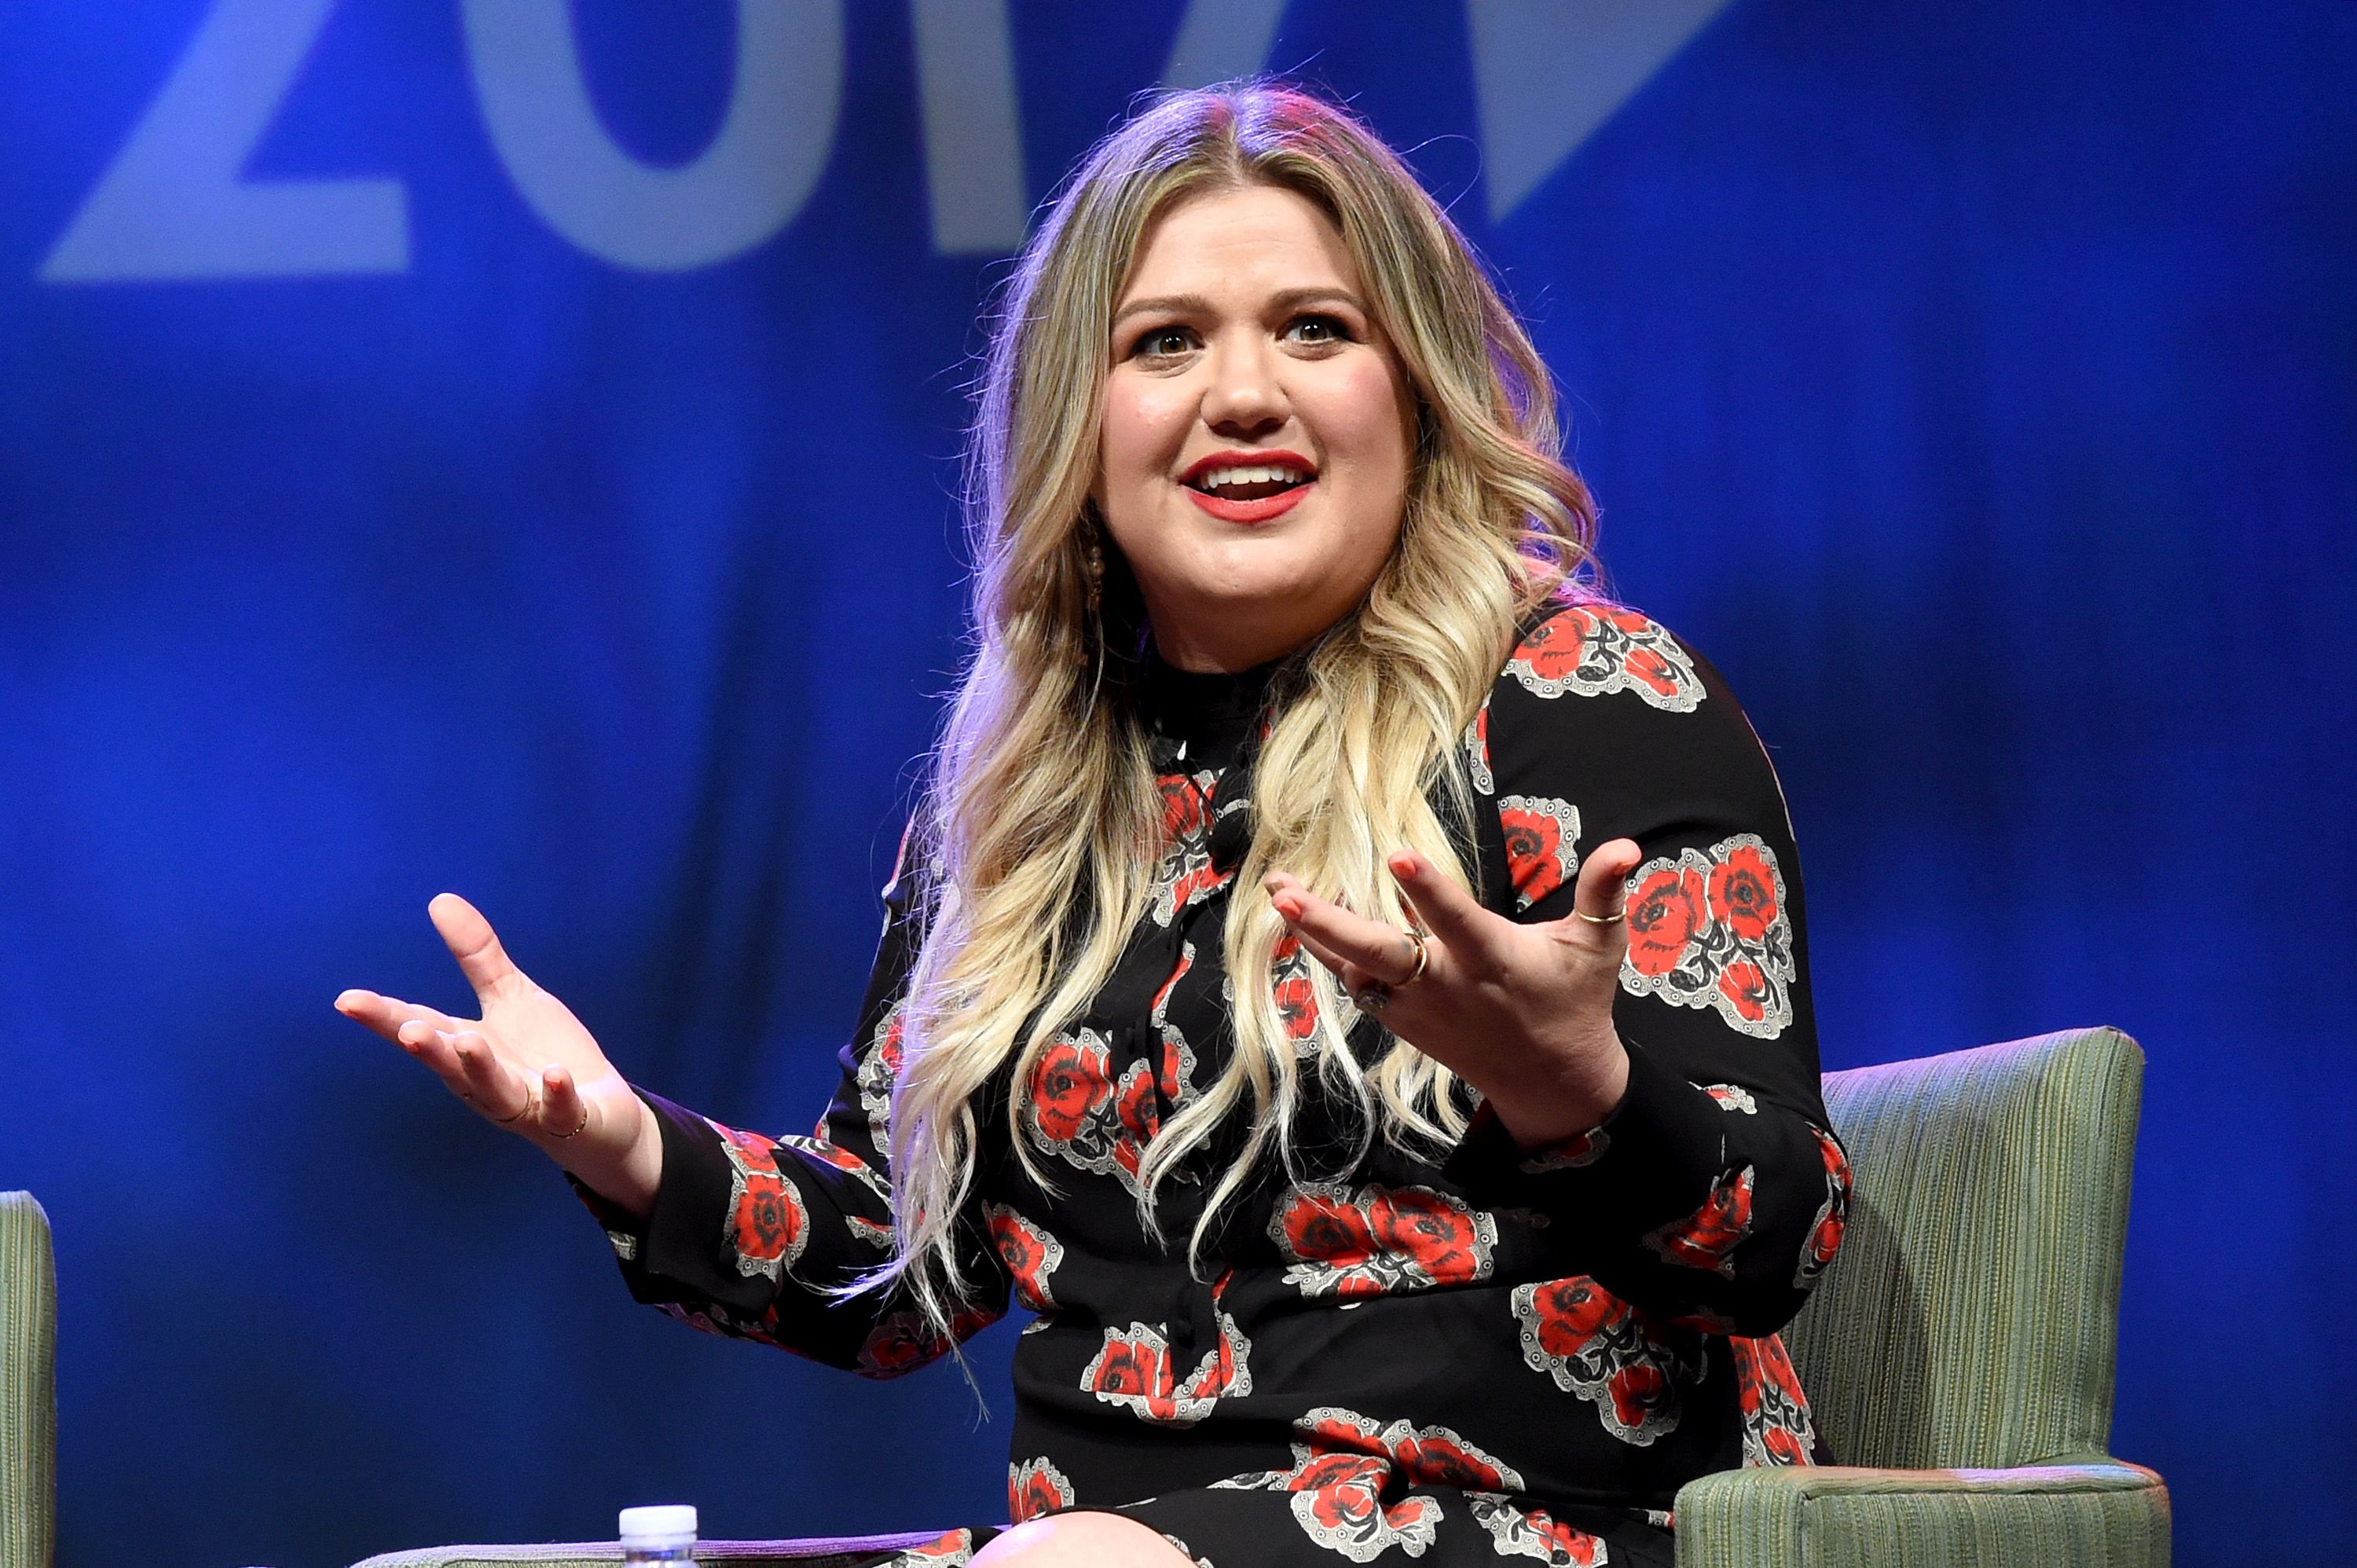 Kelly Clarkson at the Featured Presentation: Music's Leading Ladies Speak Out panel during Music Biz 2017 on May 16, 2017 | Photo: Getty Images